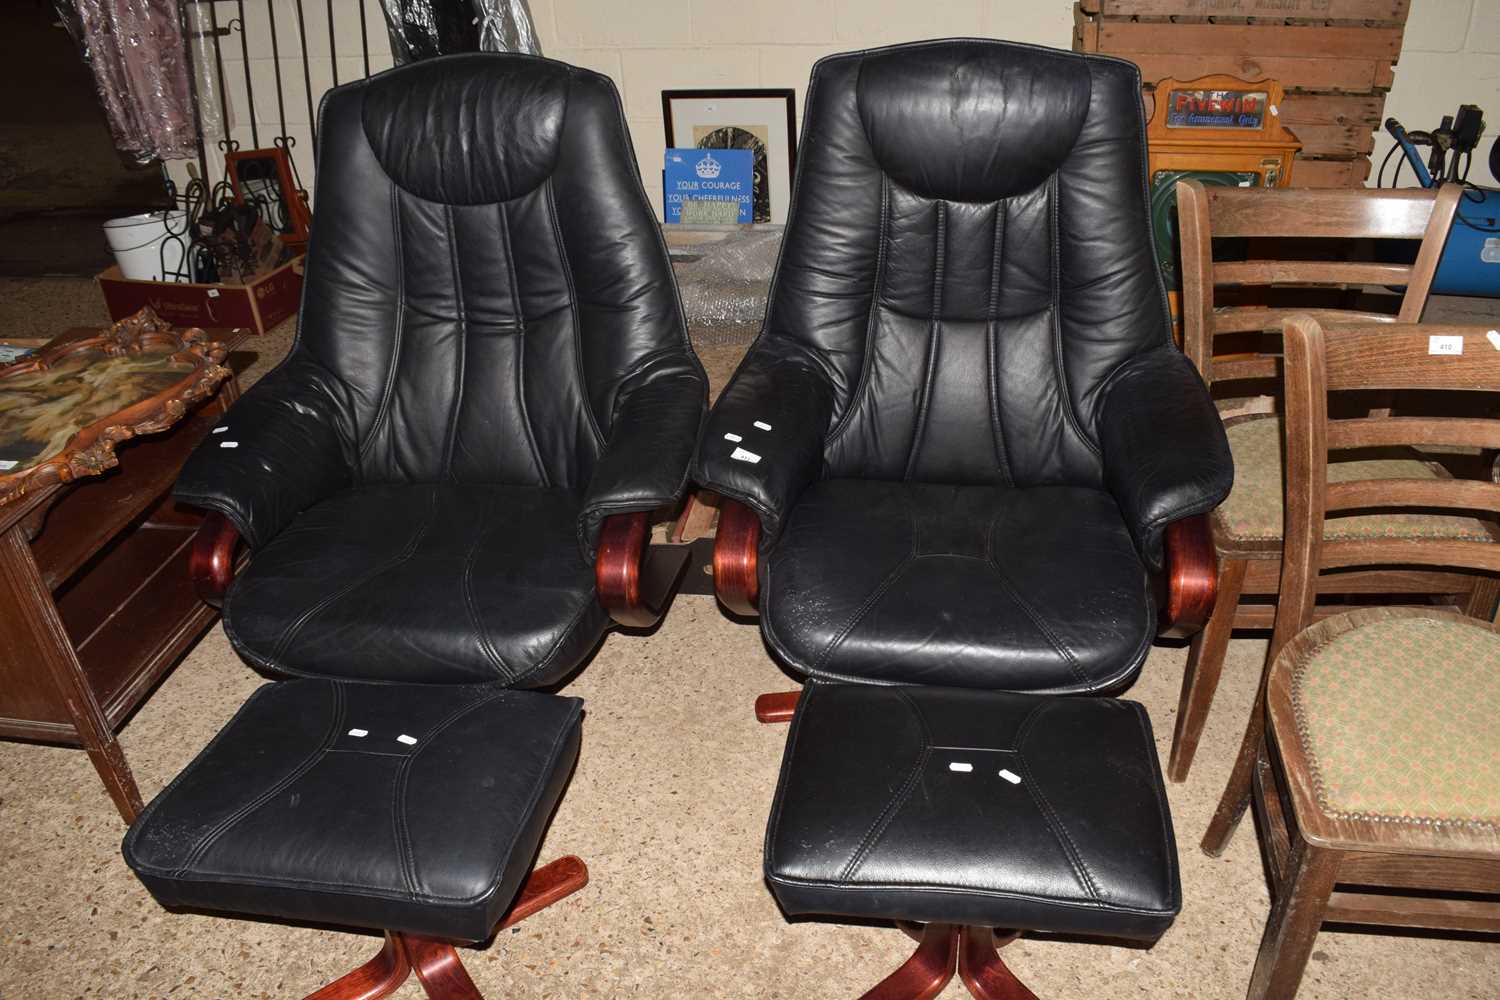 Pair of black swivel armchairs and accompanying stools